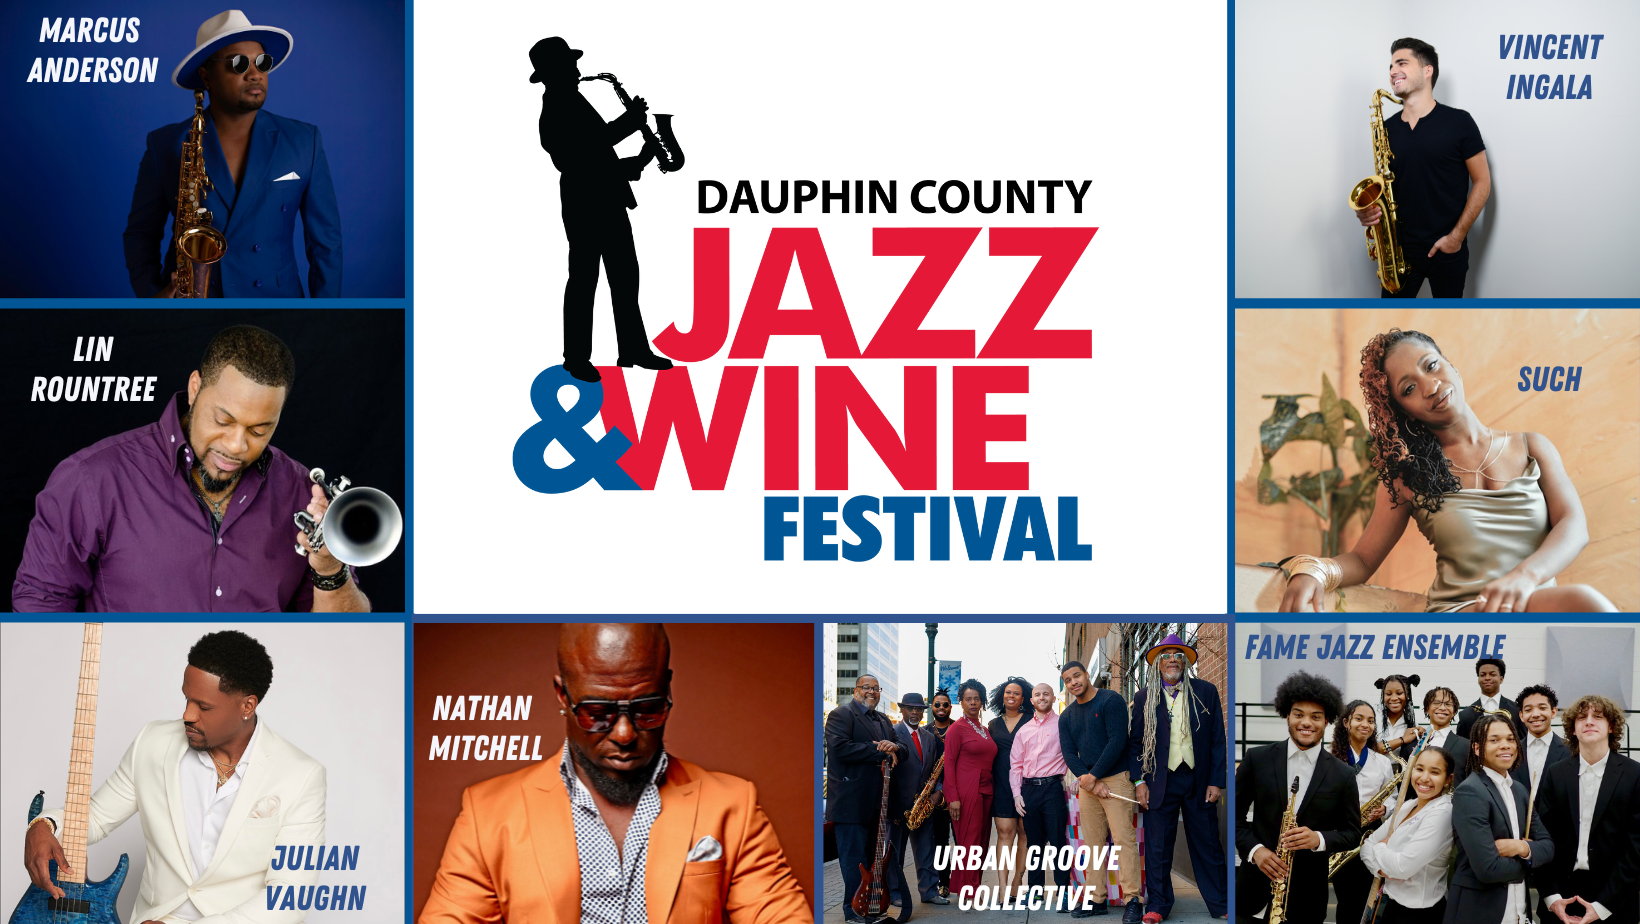 Jazz & Wine Festival 2023 Entertainers: Marcus Anderson, Lin Rountree, Julian Vaughn, Nathan Mitchell, Urban Groove Collective, Frame Jazz Ensemble, Such, Vincent Ingala along with the Dauphin County Jazz & Wine Festival logo and photos of each artist